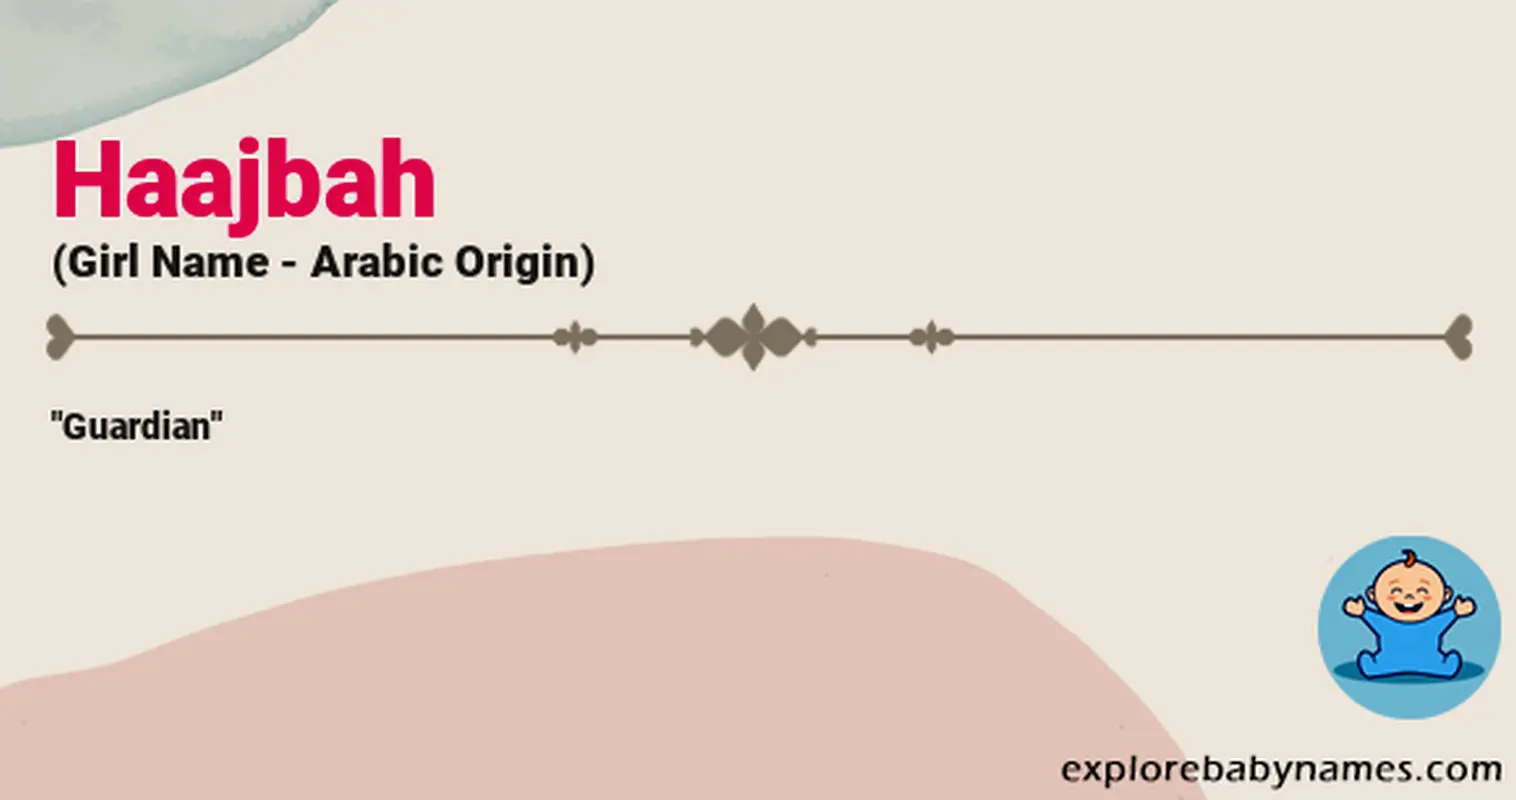 Meaning of Haajbah